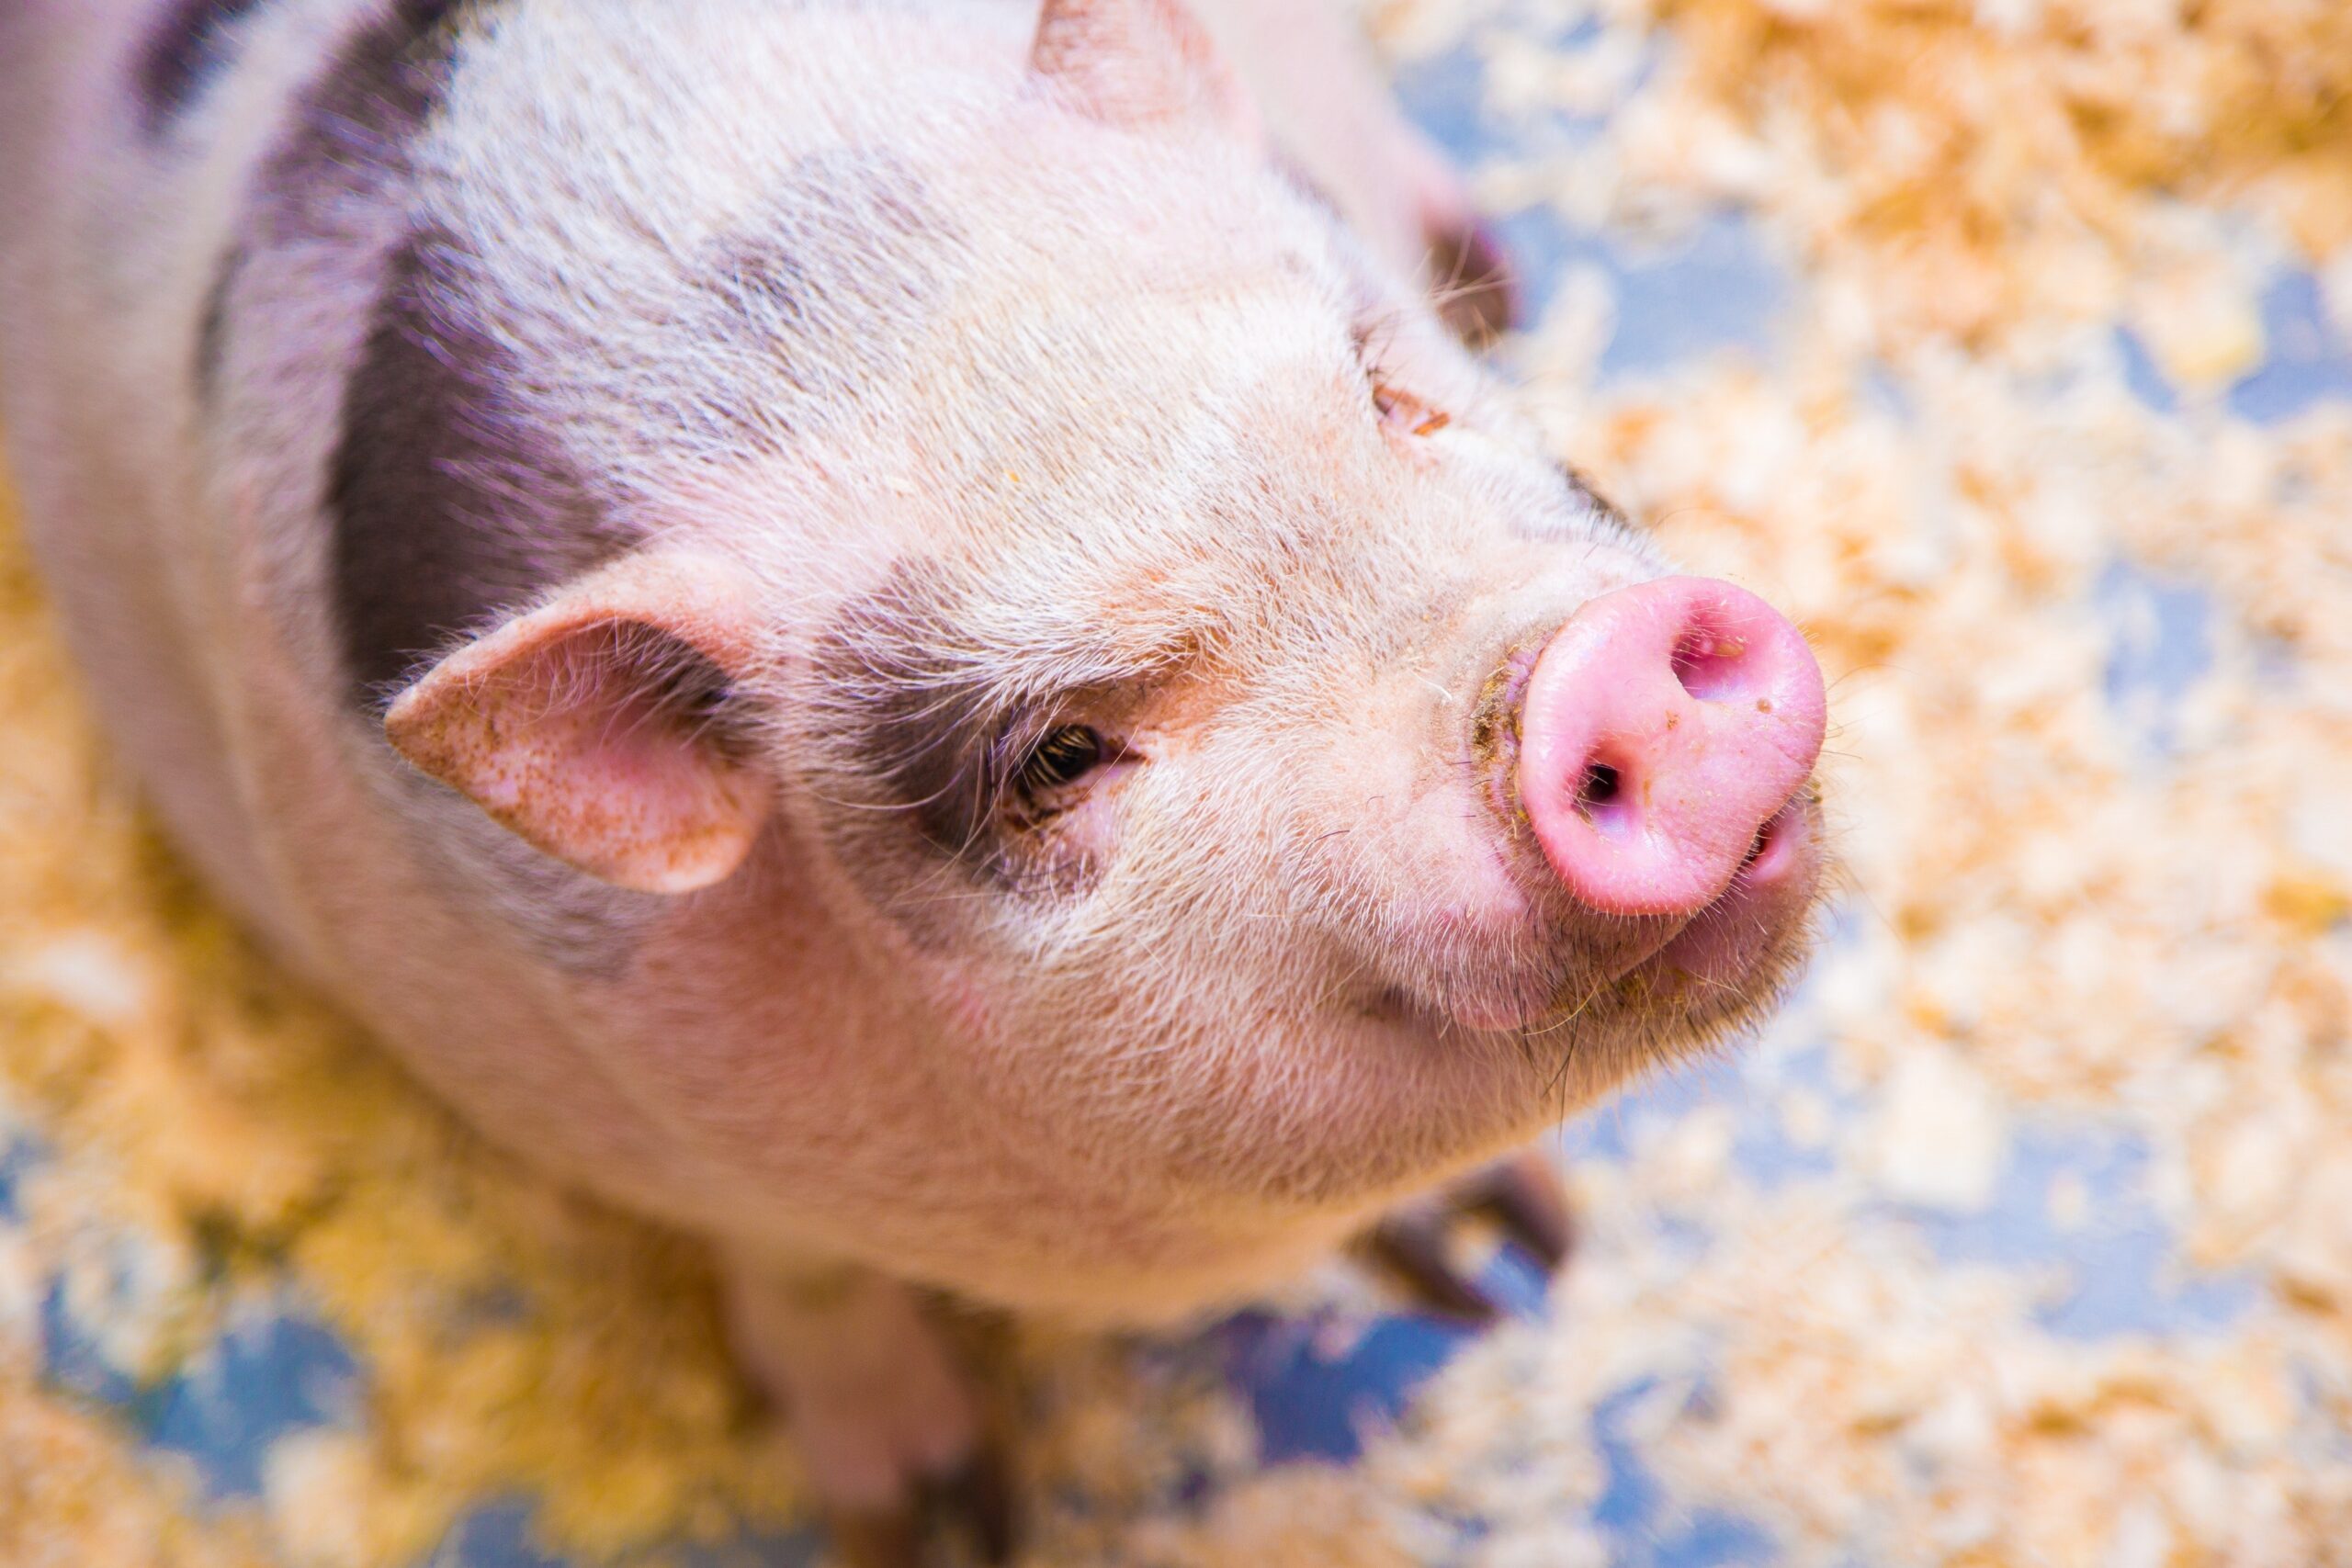 5 Unique Facts about your Pig’s Anatomy